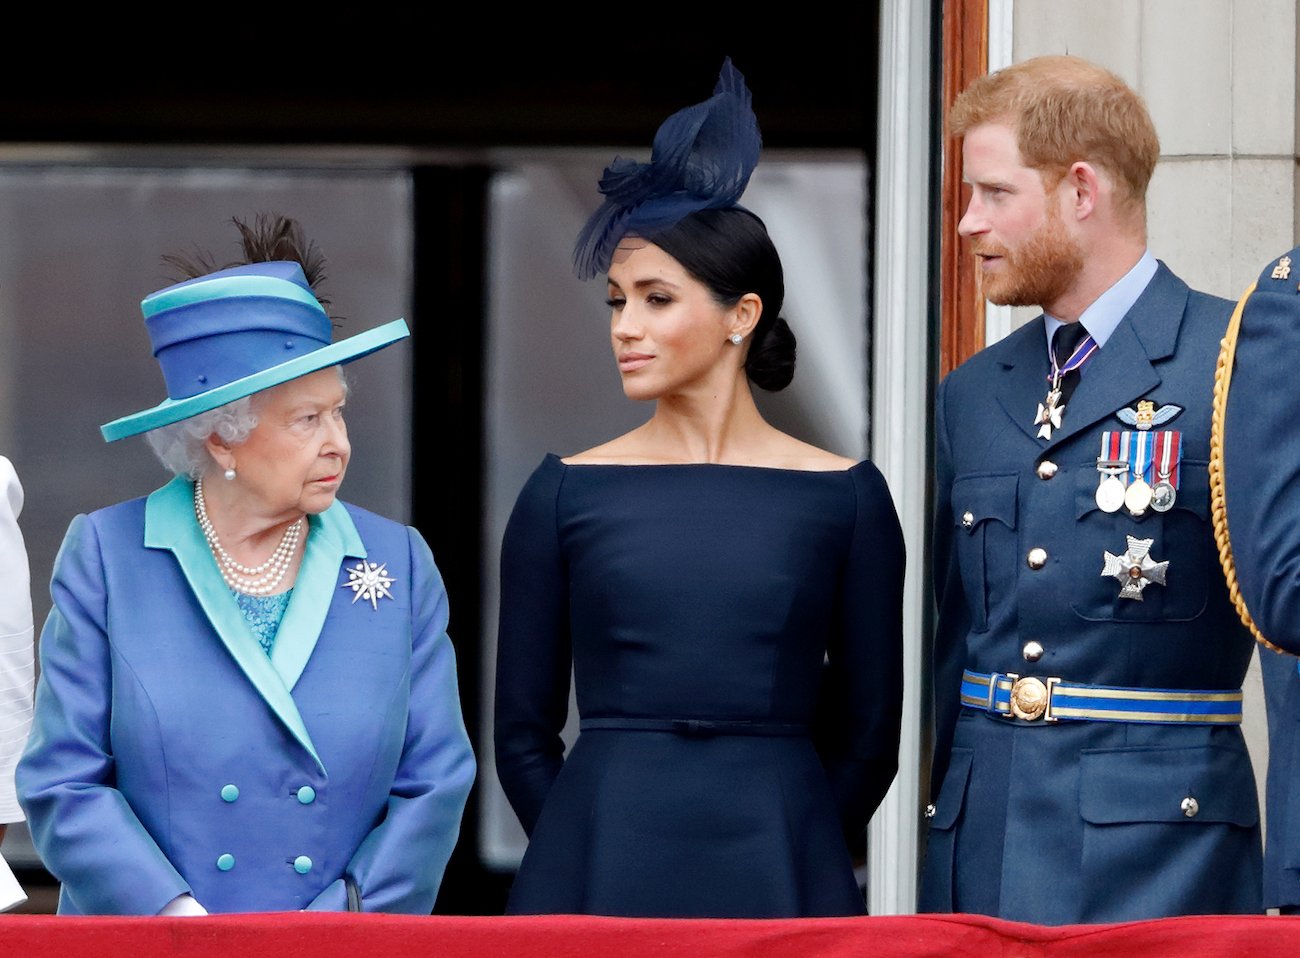 Queen Elizabeth, Meghan Markle, and Prince Harry standing side by side